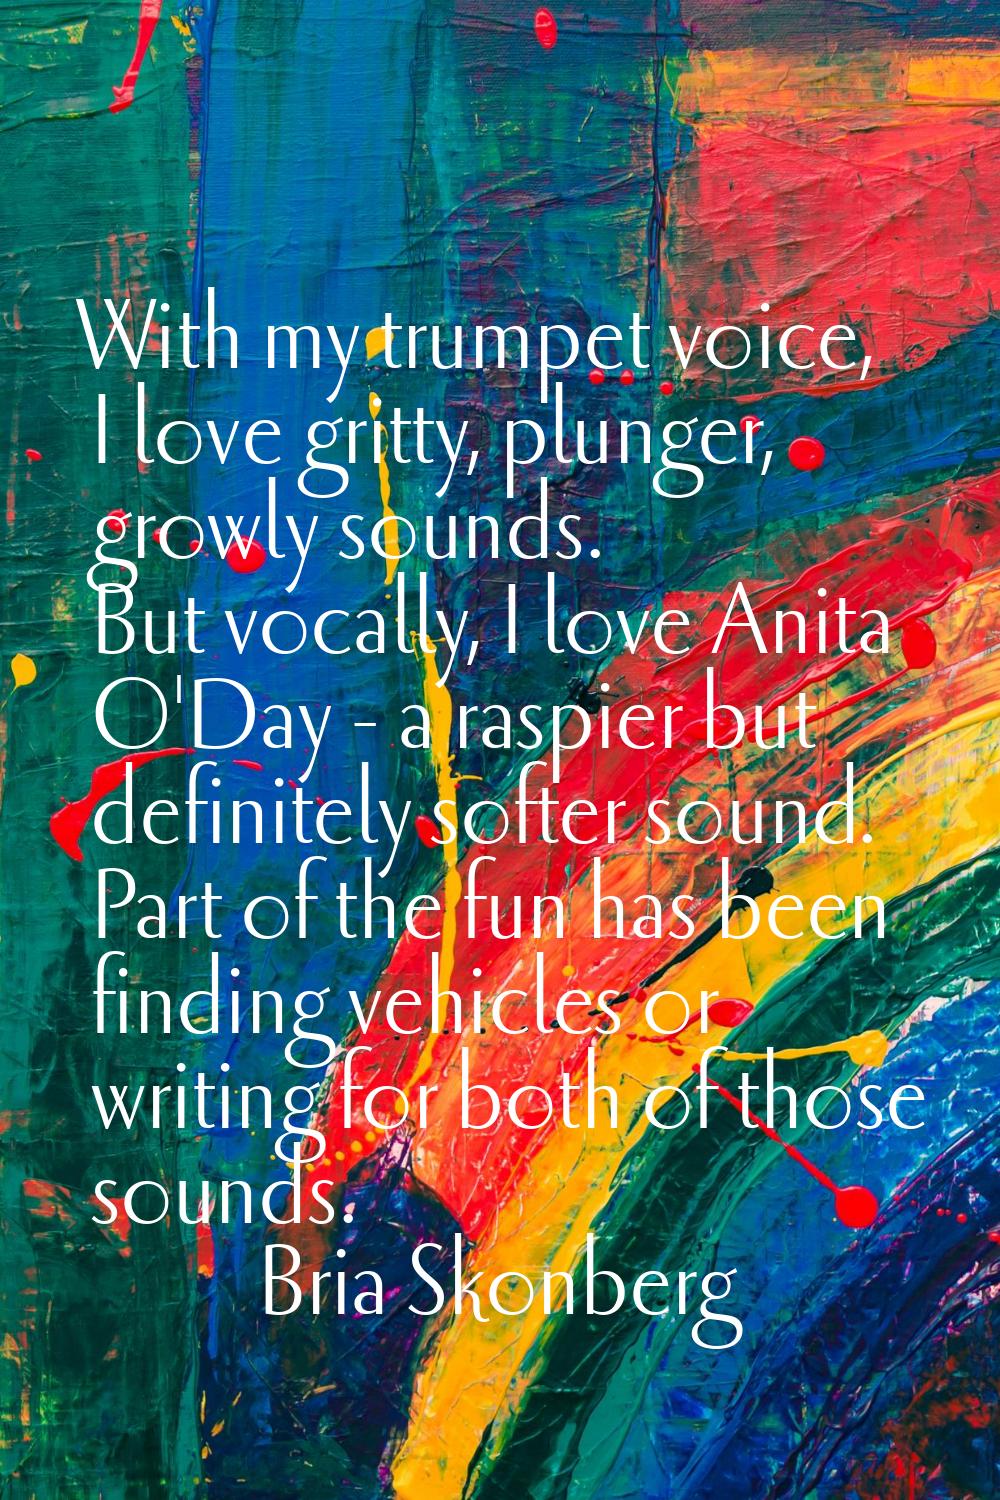 With my trumpet voice, I love gritty, plunger, growly sounds. But vocally, I love Anita O'Day - a r